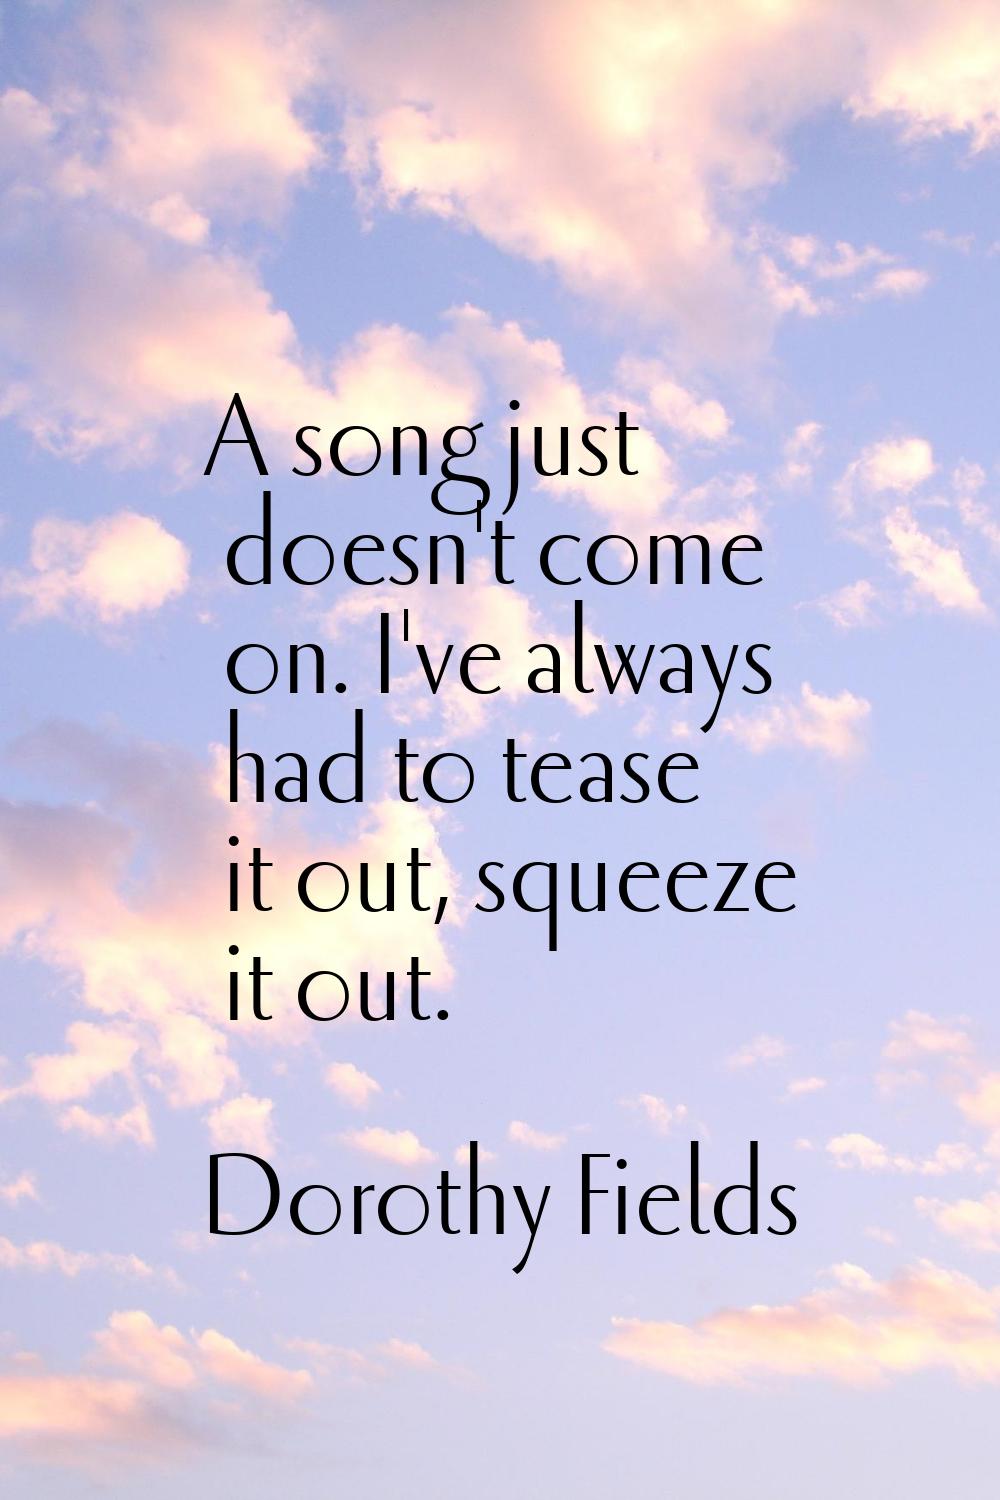 A song just doesn't come on. I've always had to tease it out, squeeze it out.